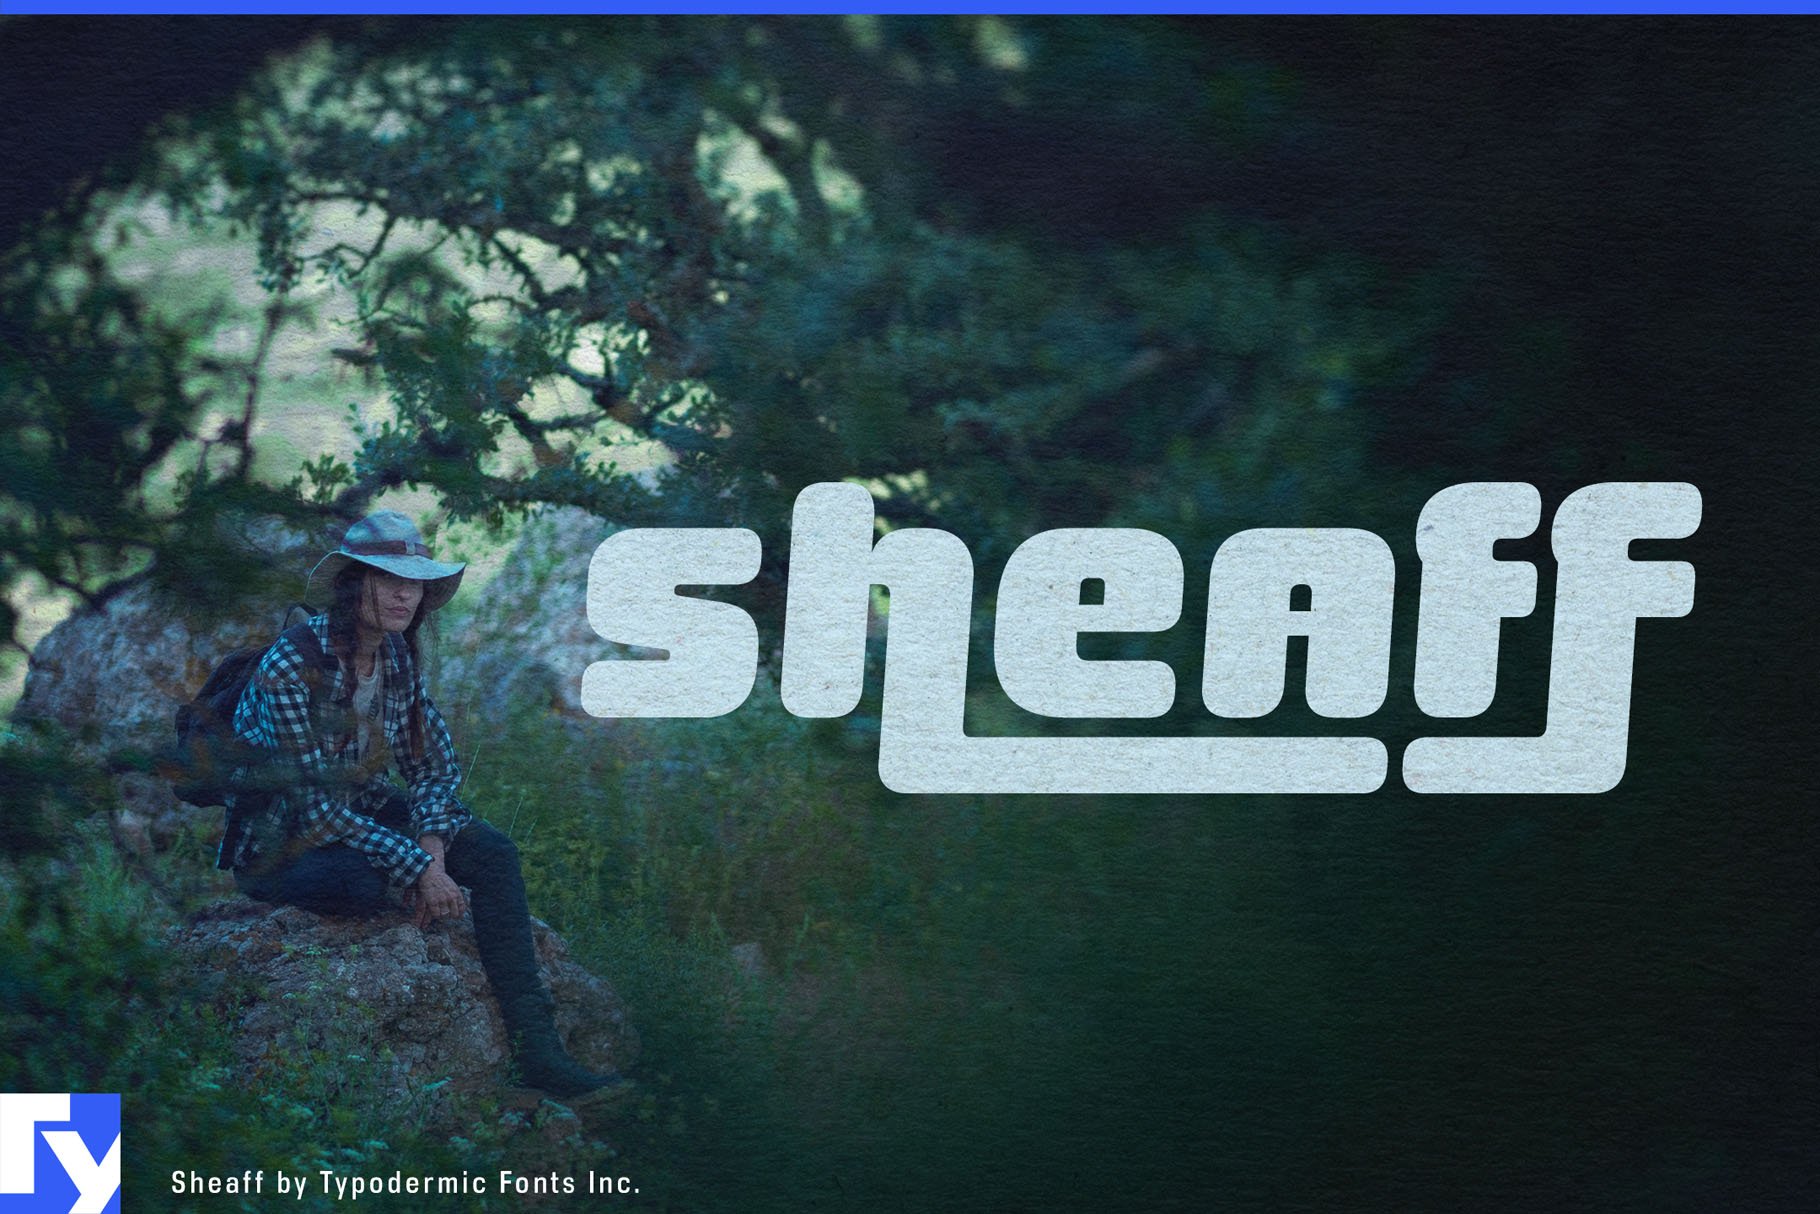 Sheaff cover image.